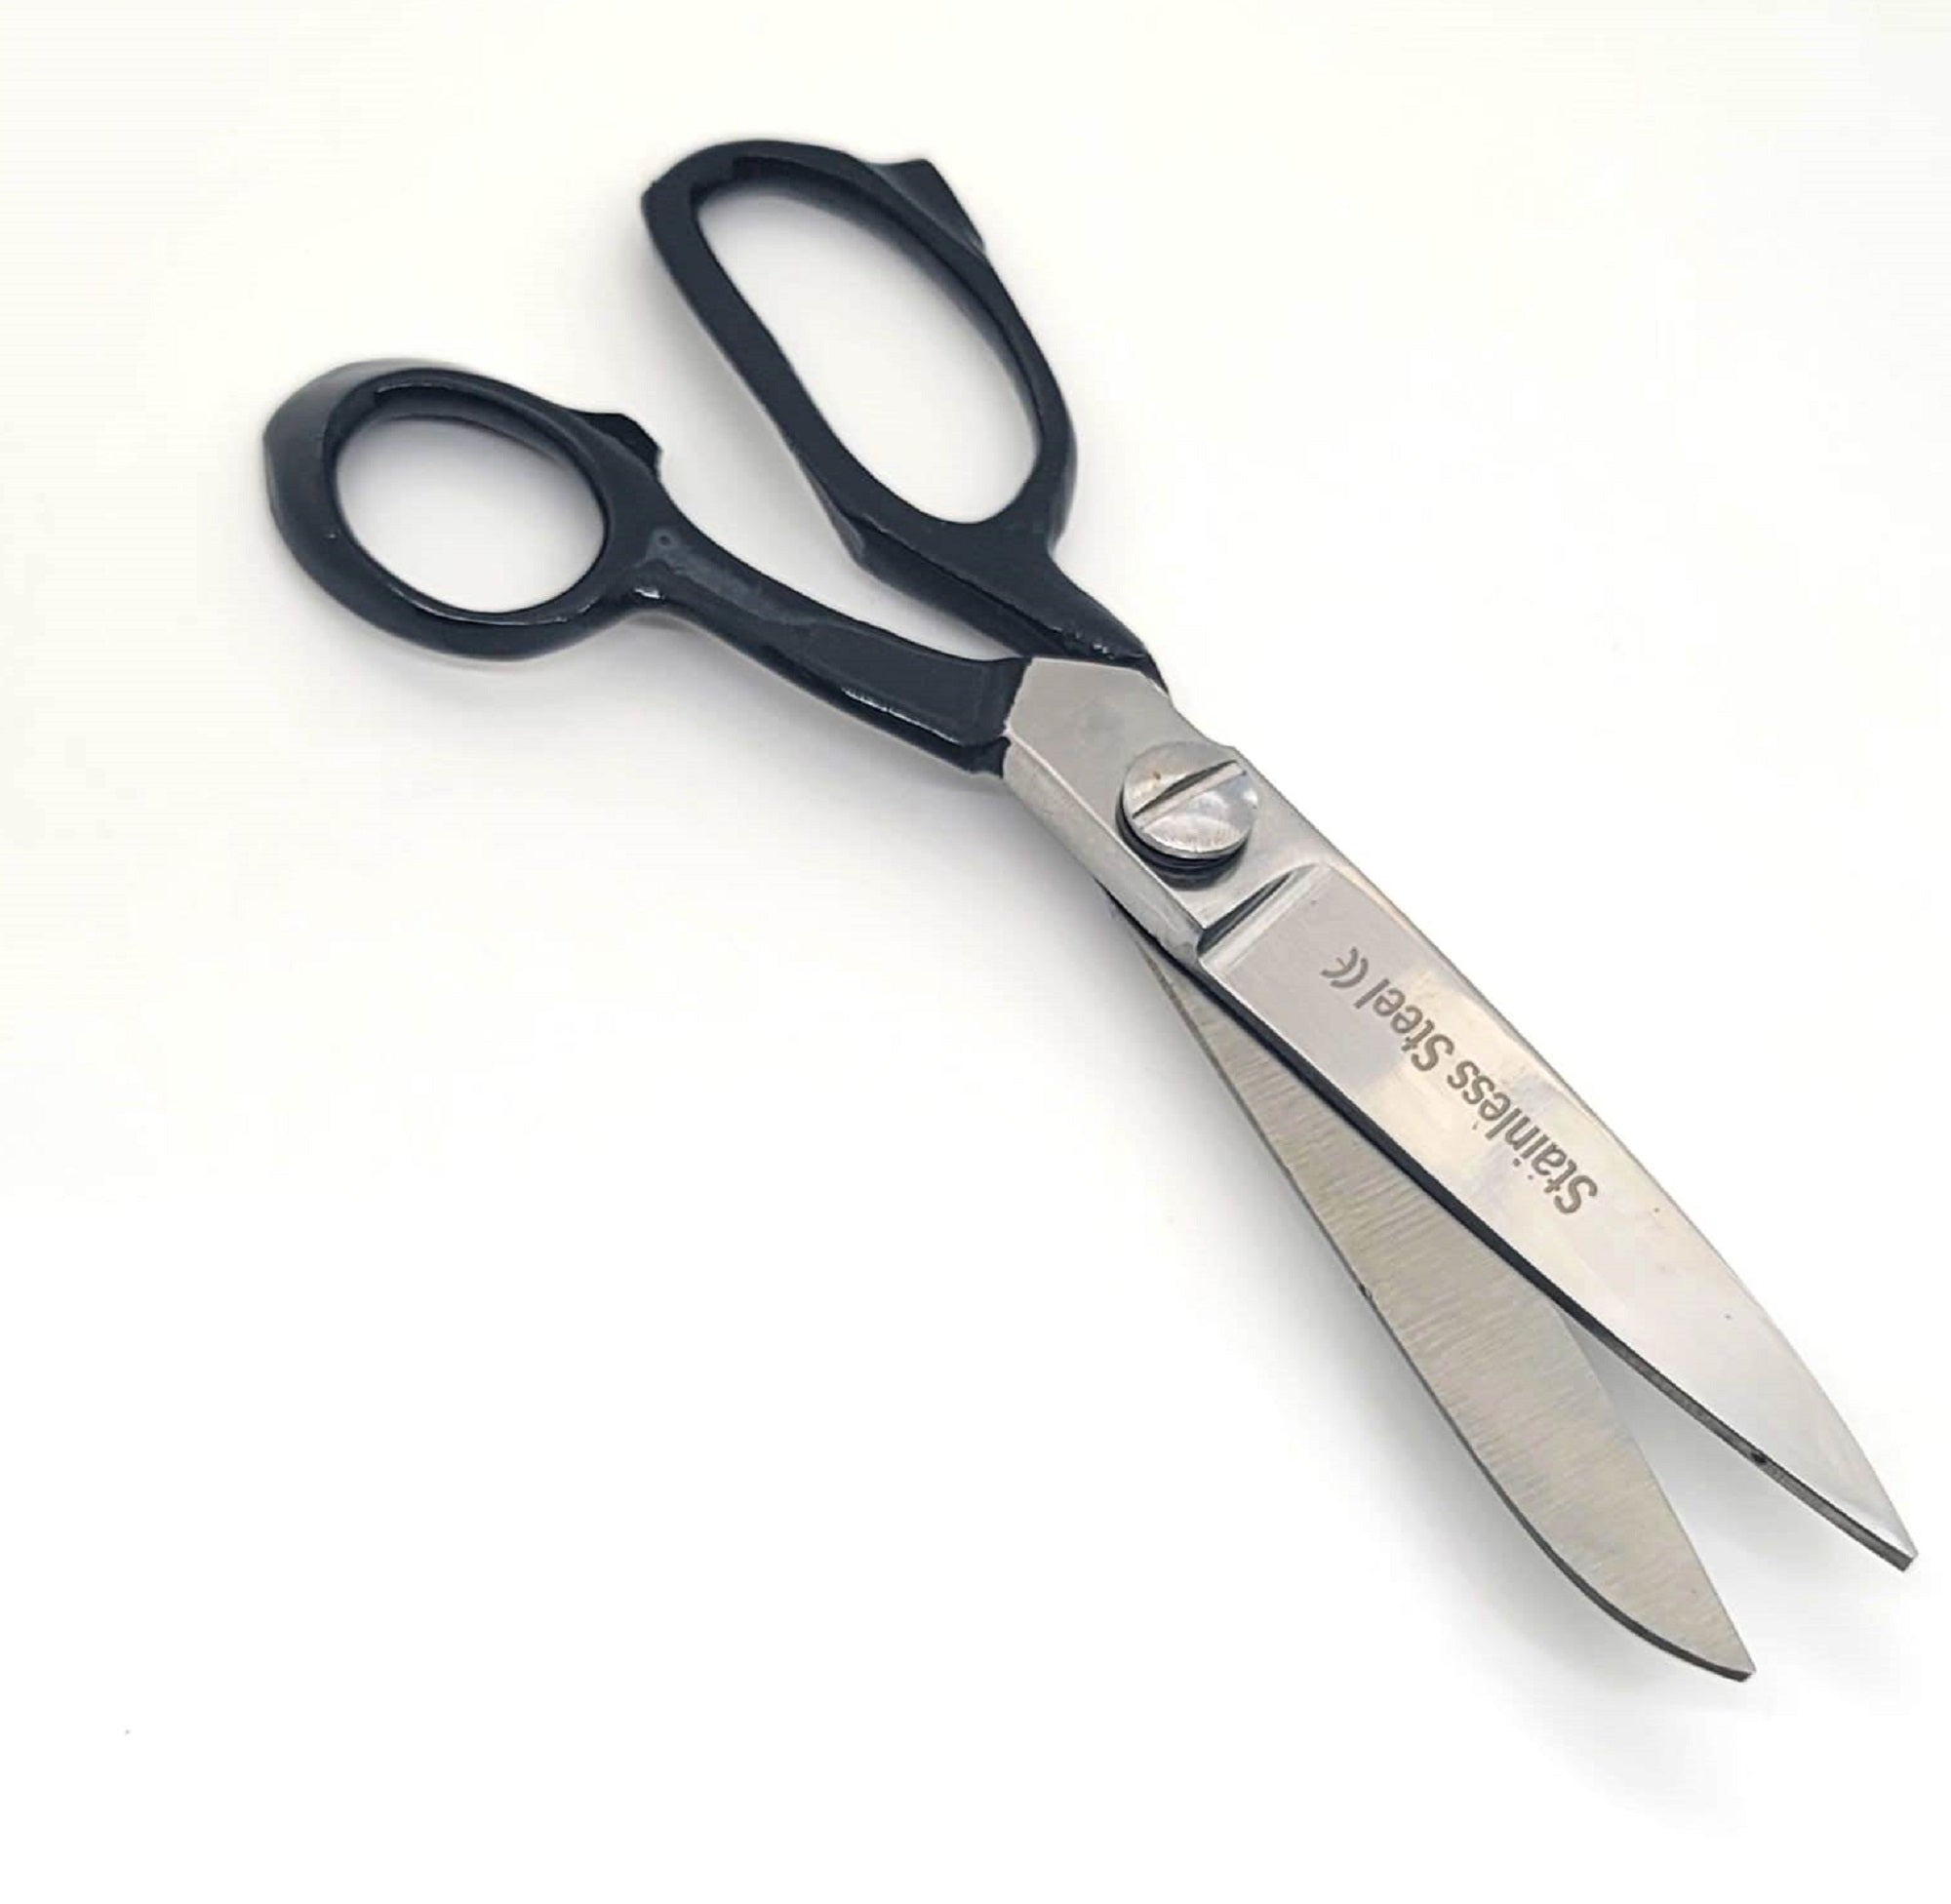 China Factory 201 Stainless Steel Pinking Shears, Serrated Scalloped  Scissors, with Plastic Handle, for Sewing, Craft, Dressmaking 230x88x21mm  in bulk online 